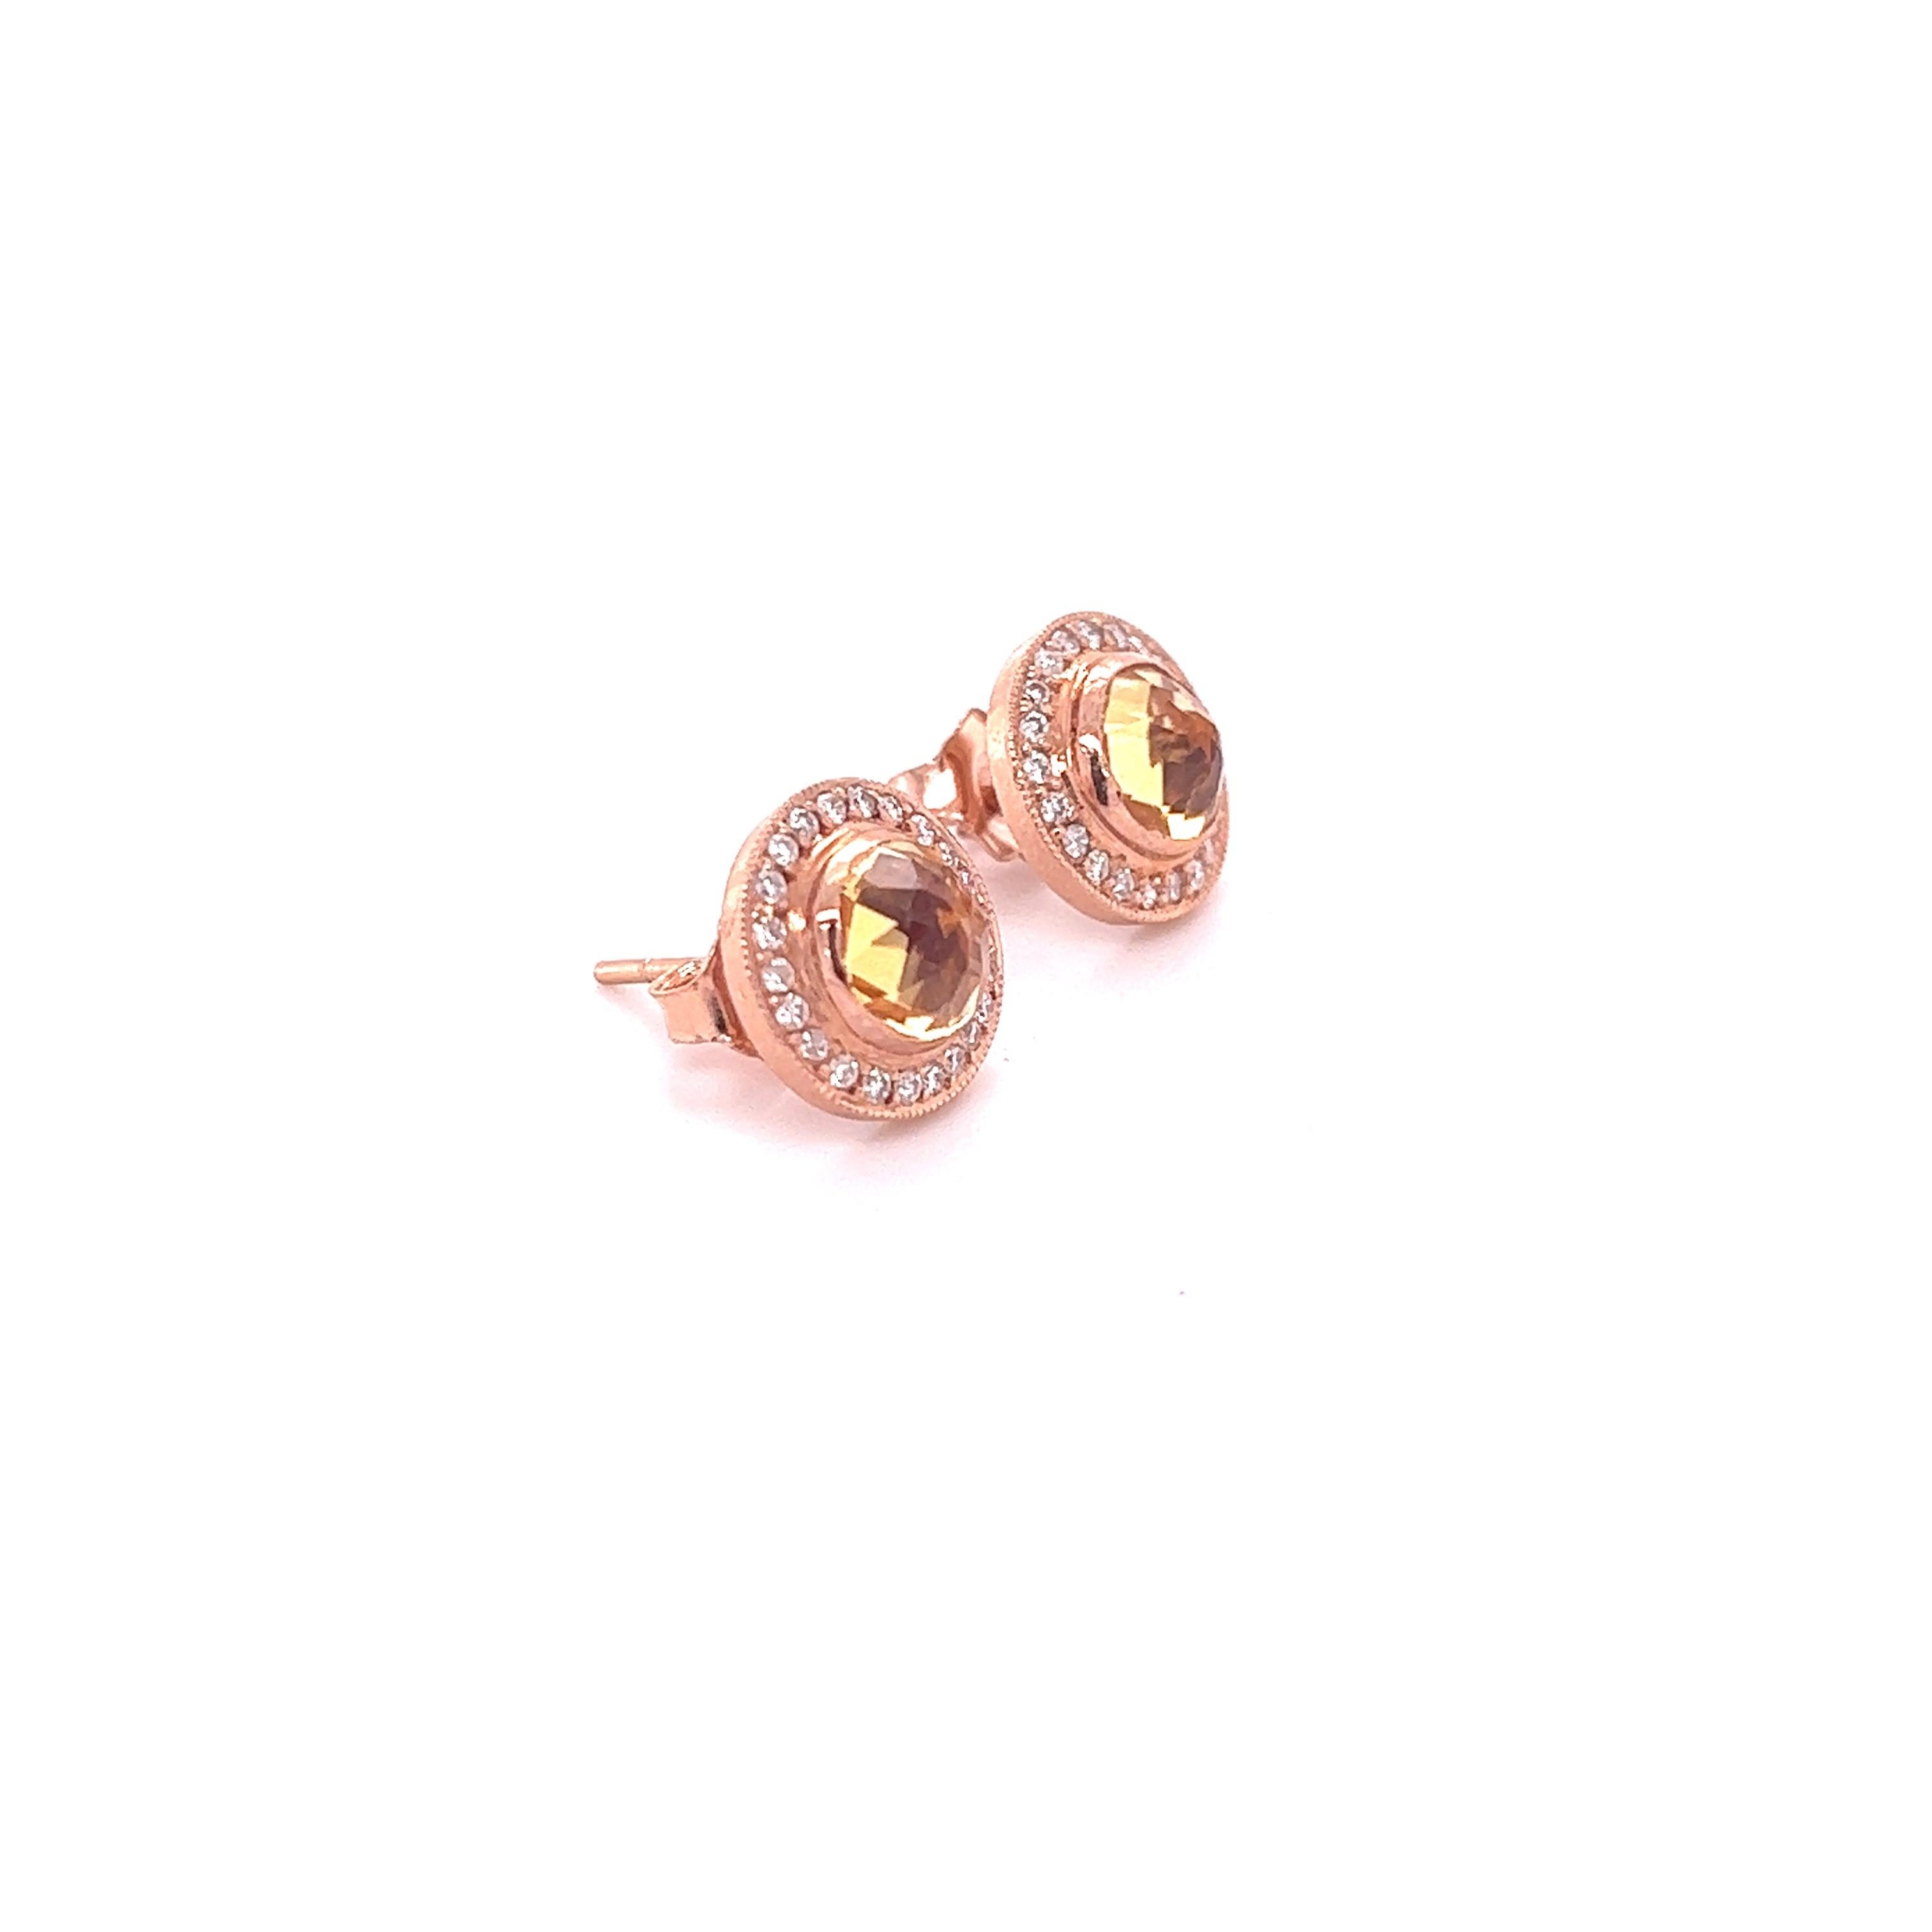 These earrings have Natural Citrines that weigh 1.58 carats and also Natural Round Cut Diamonds that weigh 0.30 carats. The total carat weight of the earrings are 1.88 carats. 

Curated in 14 Karat Rose Gold and have an approximate weight of 2.7